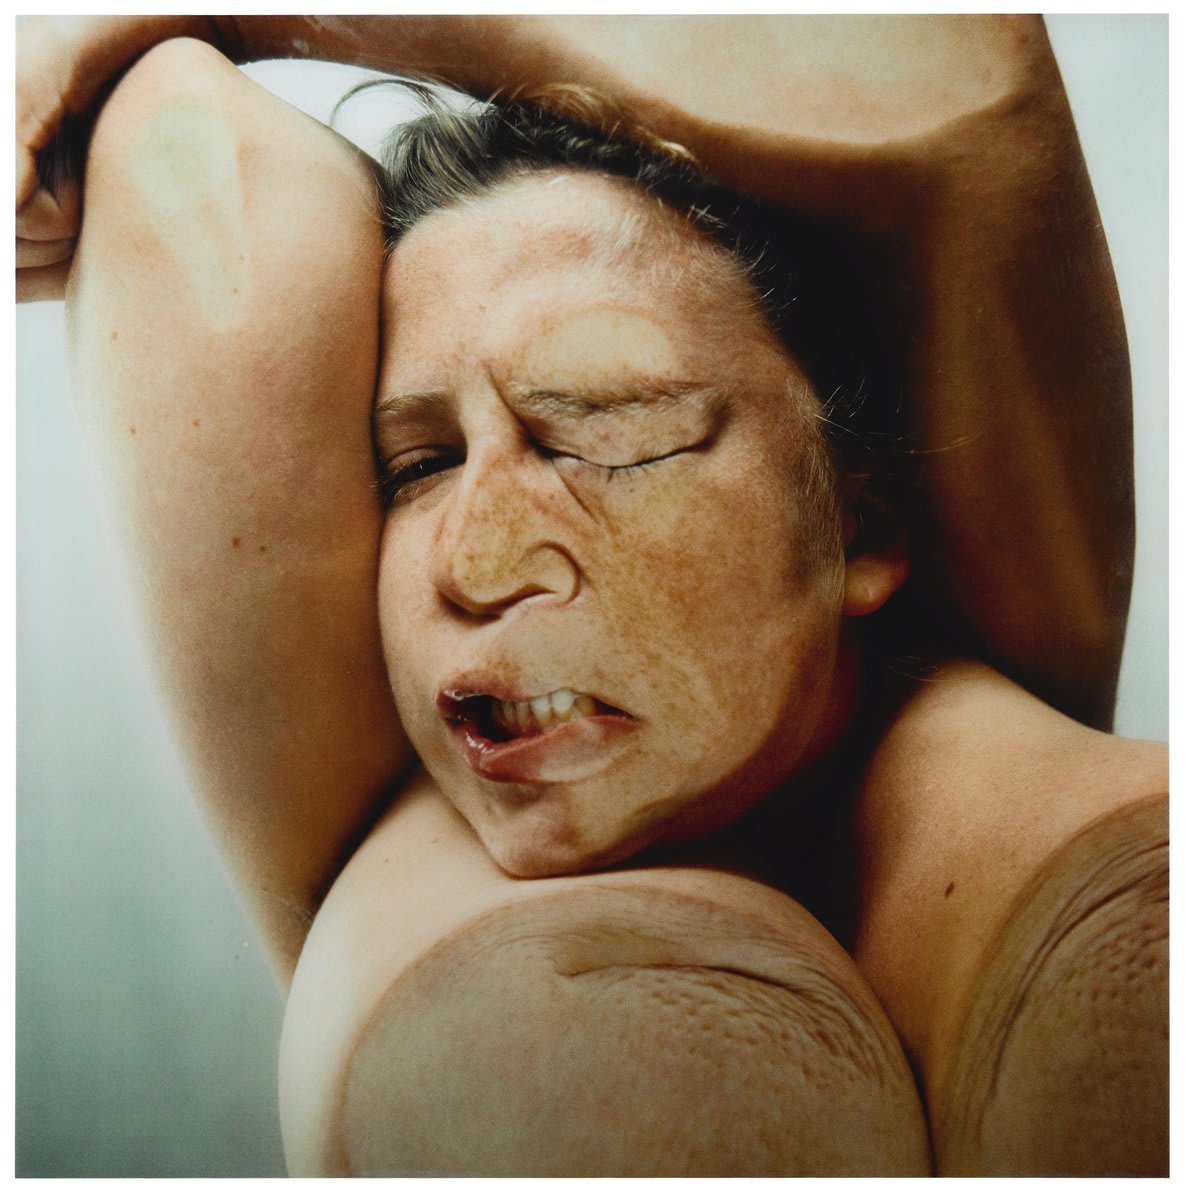 Jenny Saville: “If you know the journey that you’re walking, in a way there’s not much point in walking that journey. It’s in the struggle of trying to articulate something that almost seems impossible.”